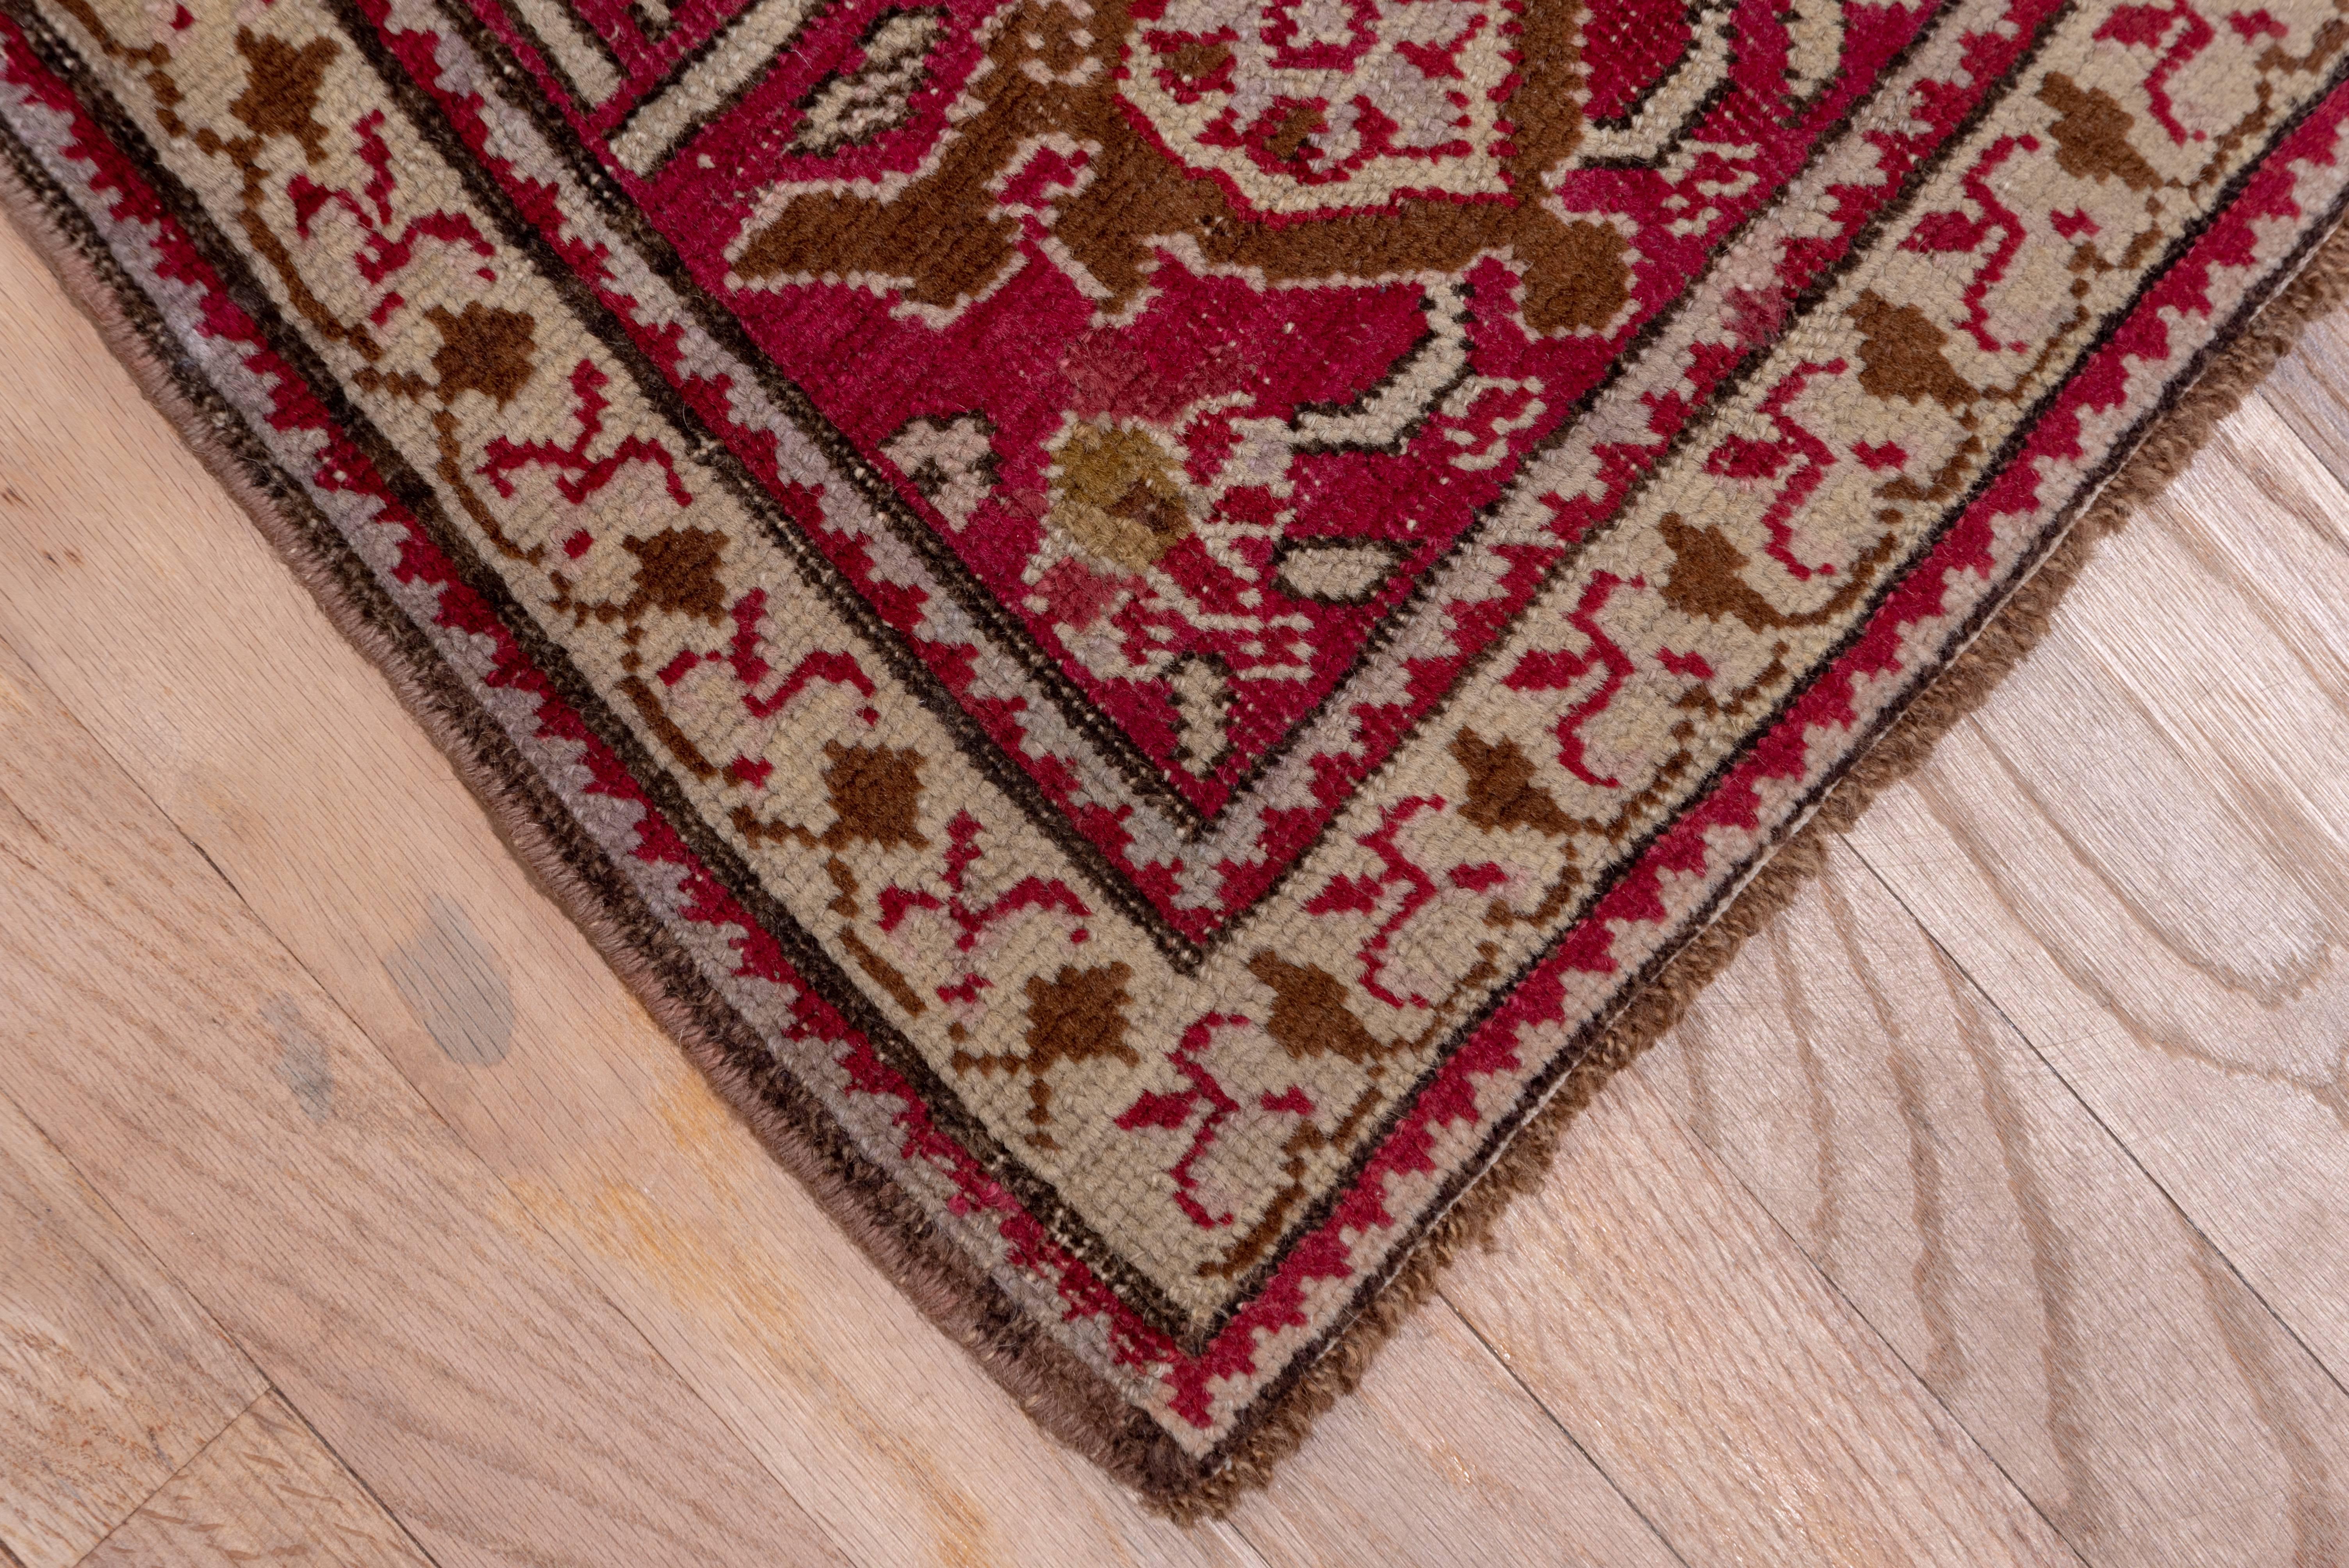 Caucasian Antique Russian Karabagh Carpet, Navy Allover Field, Berry Colored Borders For Sale